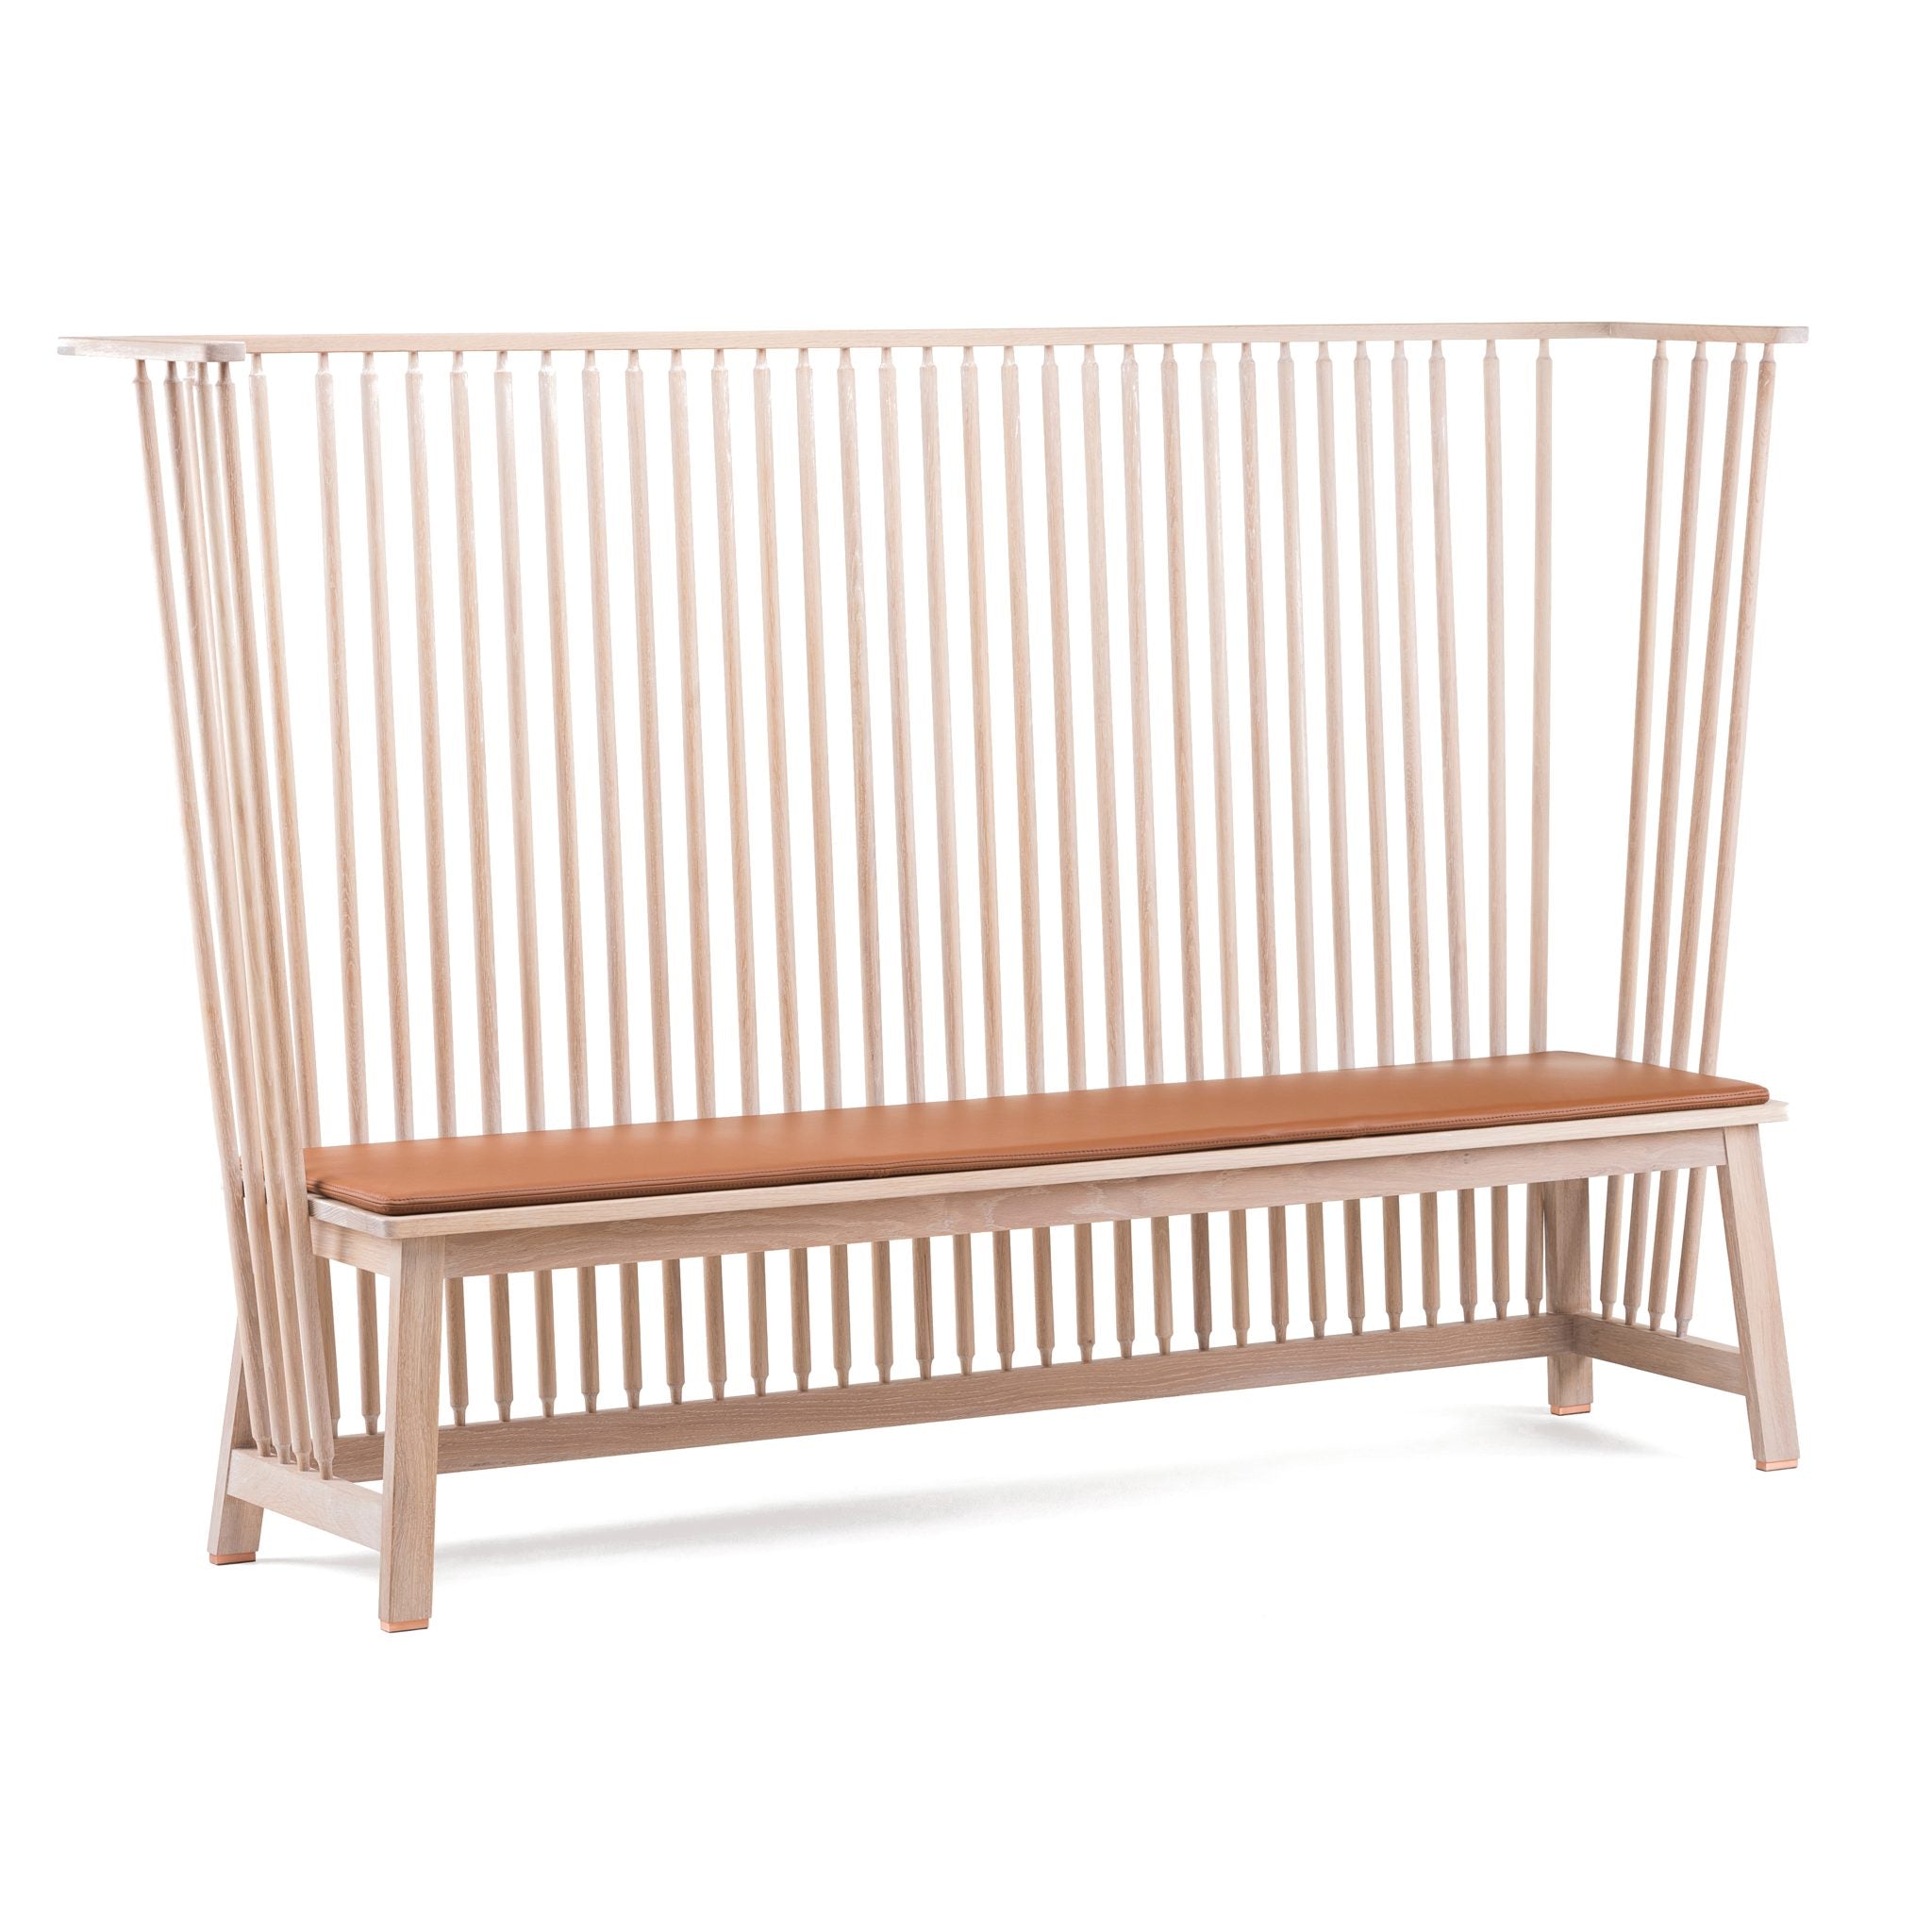 446 High Settle Bench by Ilse Crawford